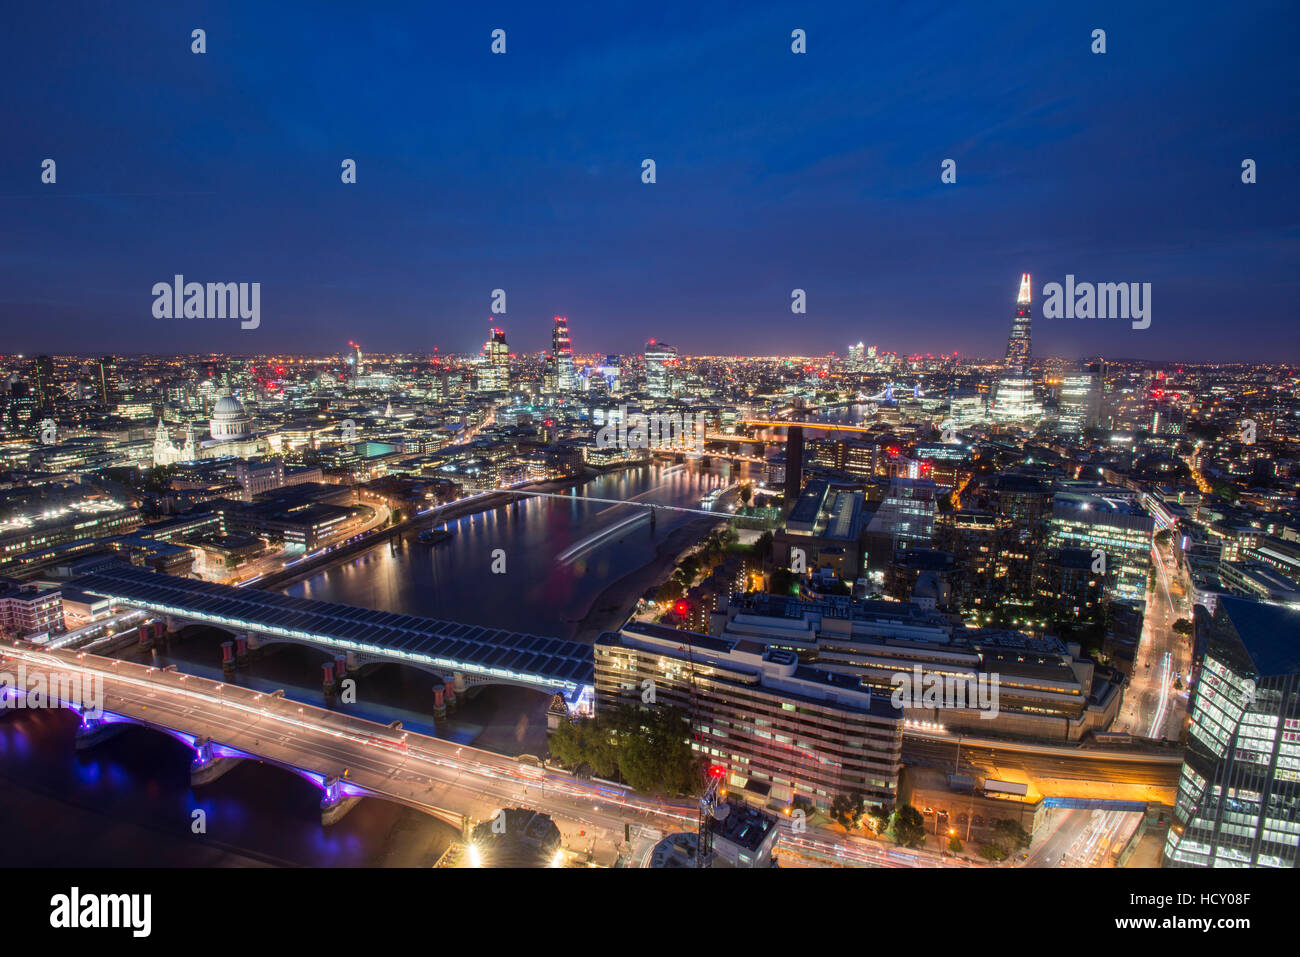 A night-time view of London and the River Thames including The Shard, St. Paul's Cathedral and Tate Modern, London, UK Stock Photo